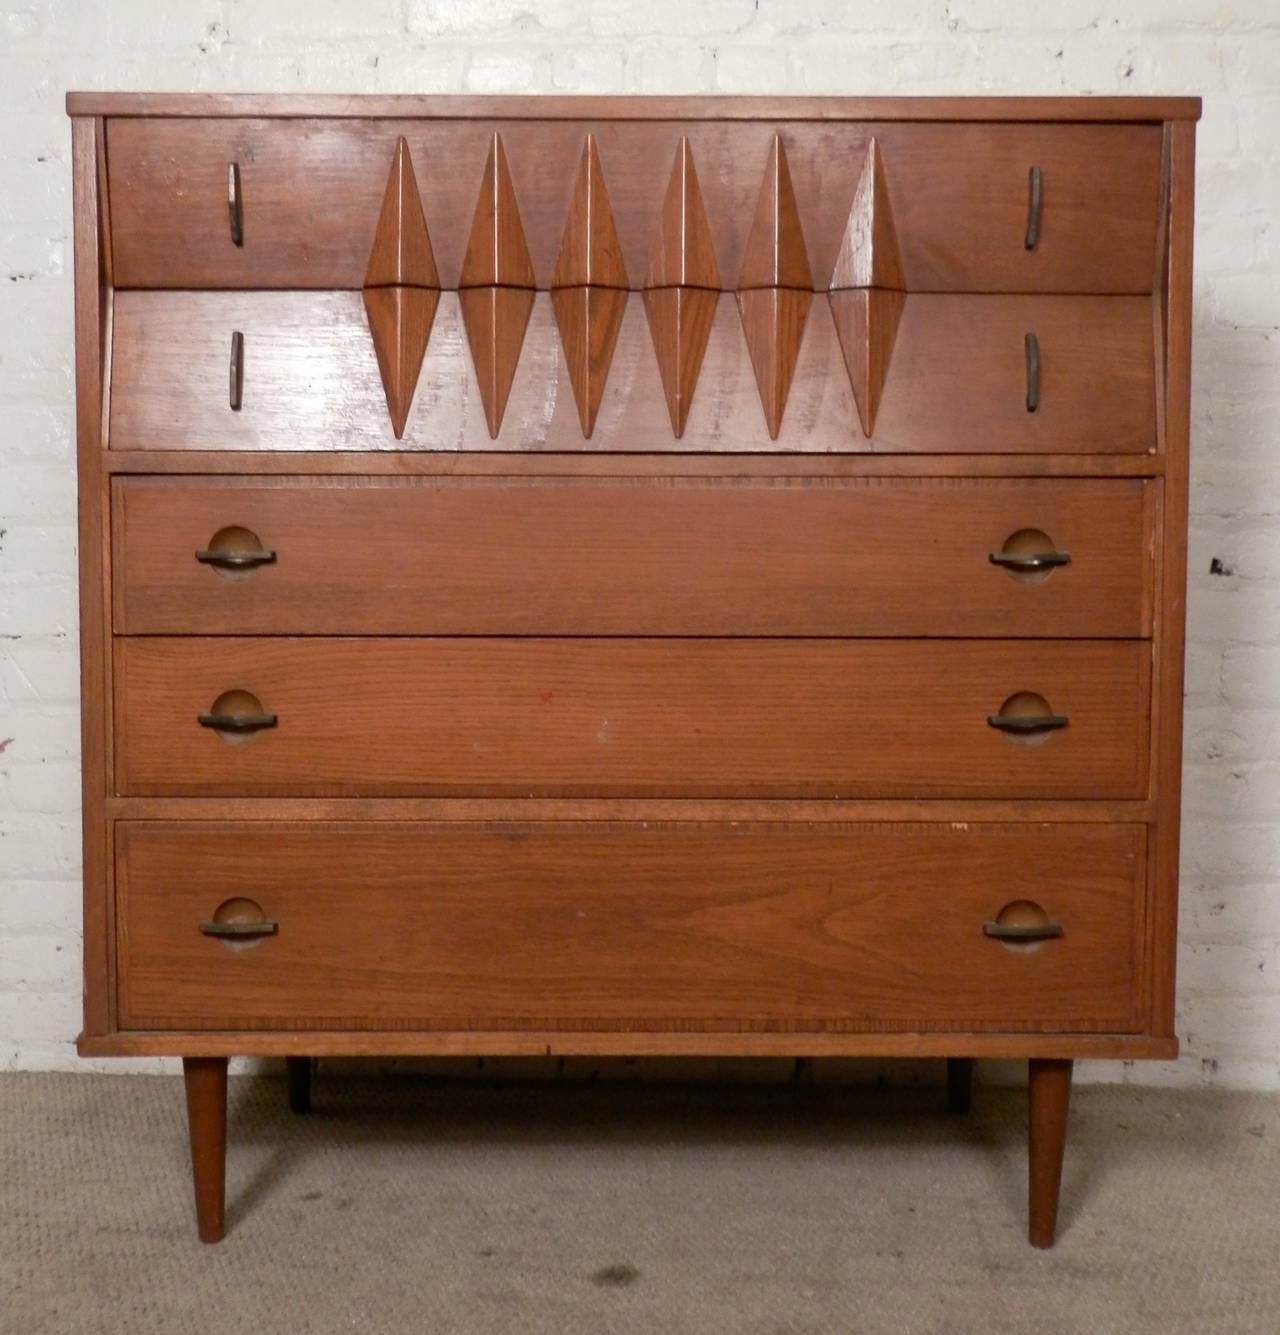 Vintage modern American dresser with a sculpted diamond style front, brass detailing, laminate top and cone-shaped legs. Unusual design that stills works in modern rooms.

(Please confirm item location - NY or NJ - with dealer)